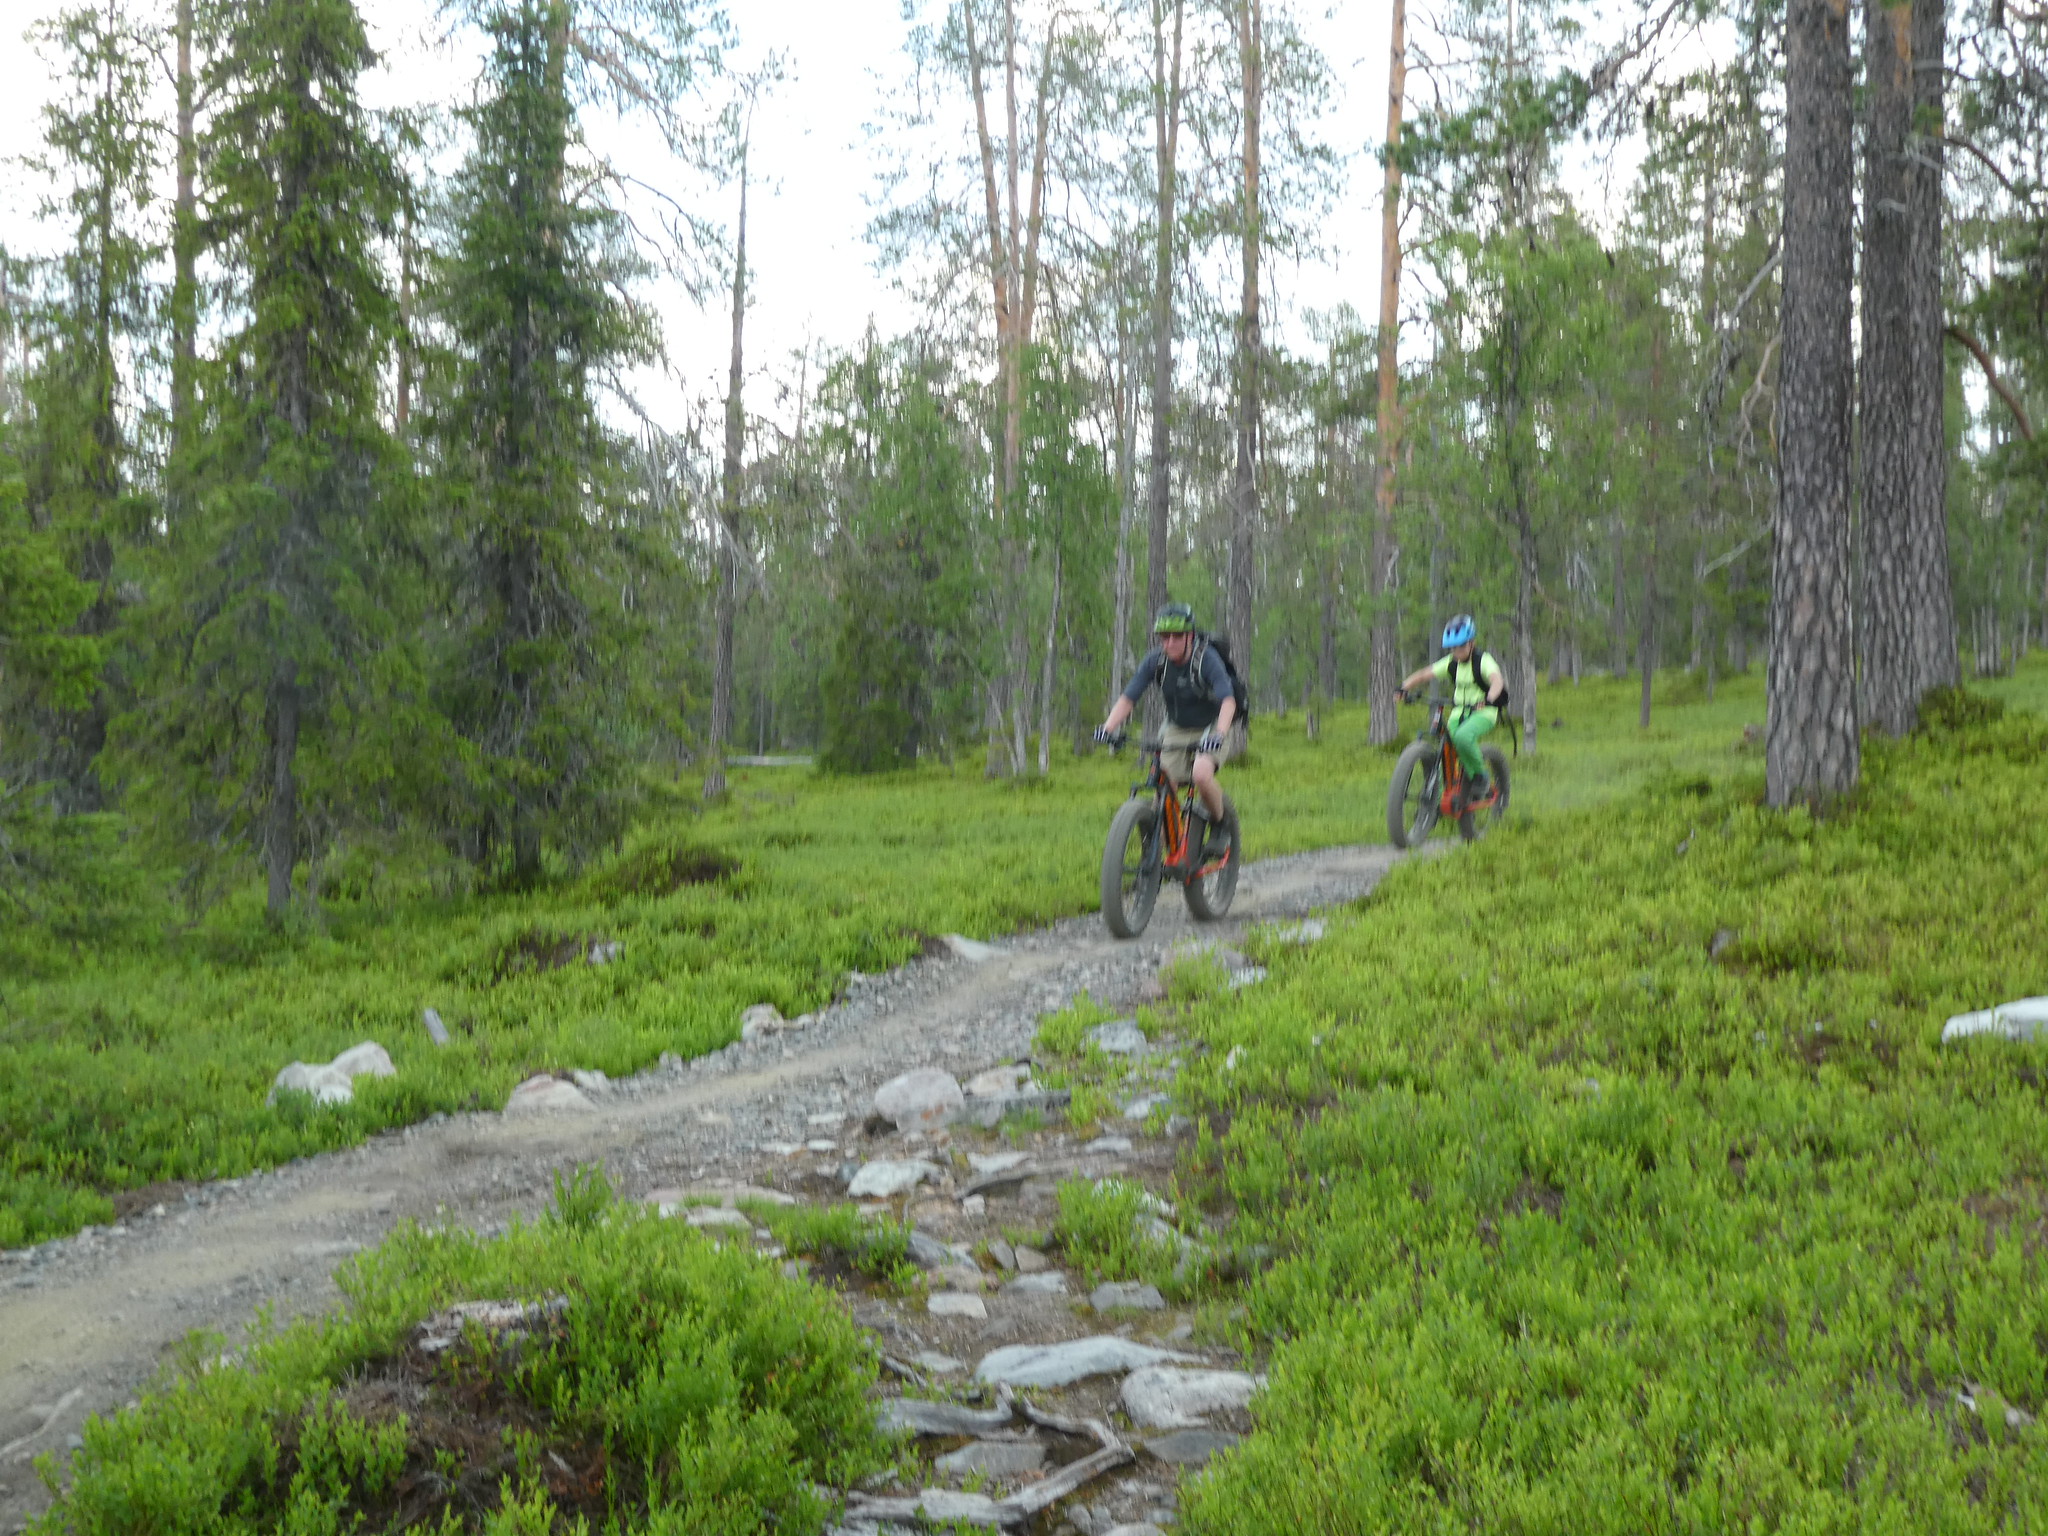 One of the many cycle trails in the Ylläs area